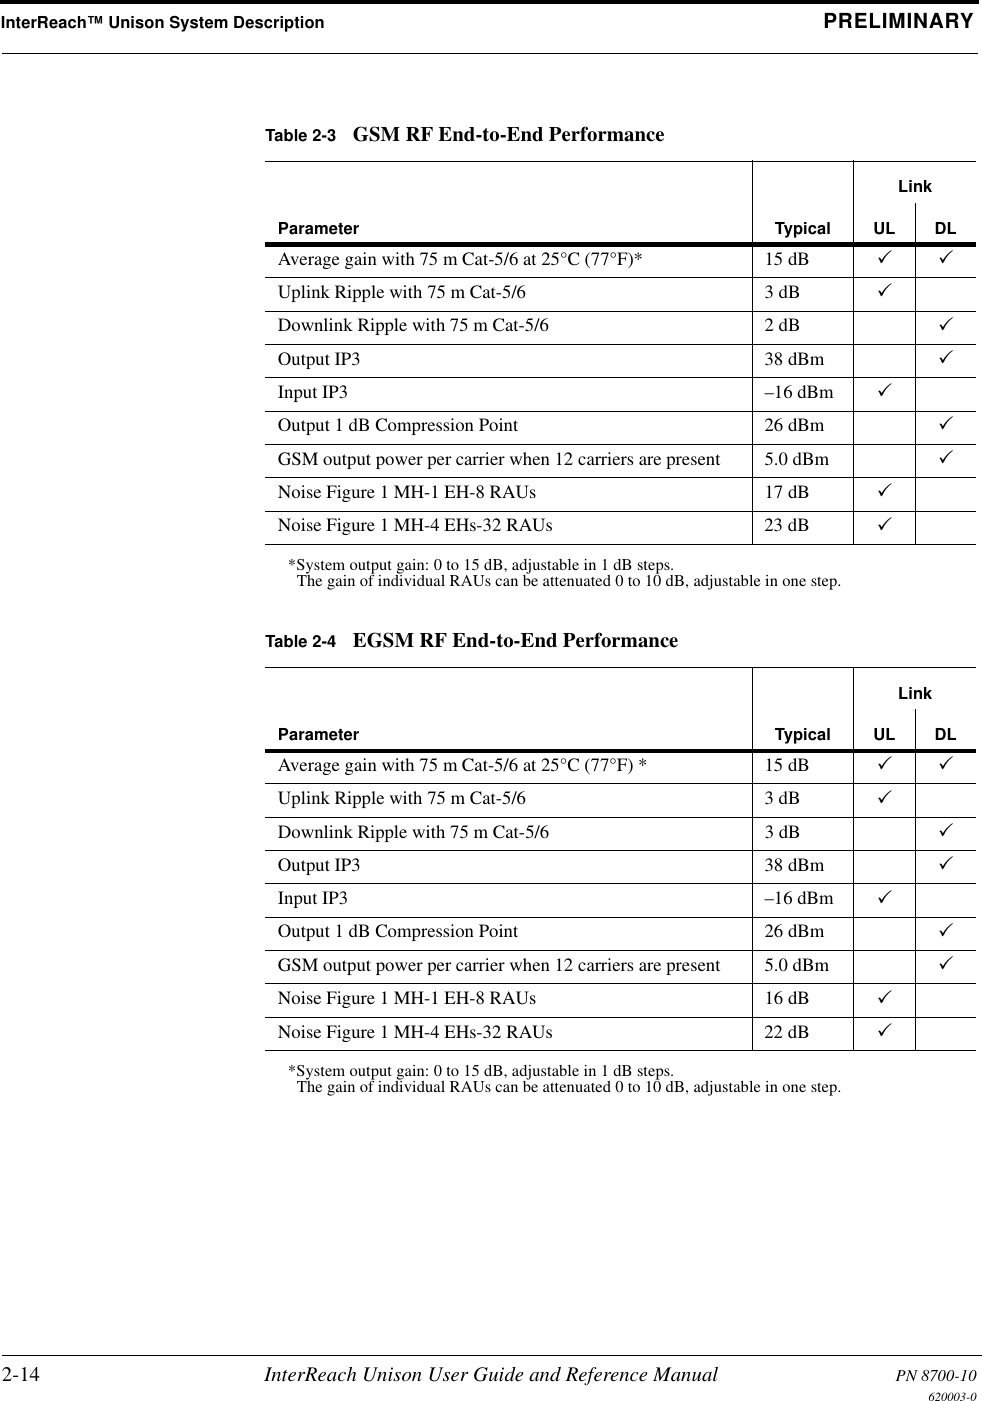 InterReach™ Unison System Description PRELIMINARY2-14 InterReach Unison User Guide and Reference Manual PN 8700-10620003-0Table 2-3 GSM RF End-to-End PerformanceParameter TypicalLinkUL DLAverage gain with 75 m Cat-5/6 at 25°C (77°F)**System output gain: 0 to 15 dB, adjustable in 1 dB steps. The gain of individual RAUs can be attenuated 0 to 10 dB, adjustable in one step. 15 dB Uplink Ripple with 75 m Cat-5/6  3 dB Downlink Ripple with 75 m Cat-5/6  2 dB Output IP3 38 dBm Input IP3 –16 dBm Output 1 dB Compression Point 26 dBm GSM output power per carrier when 12 carriers are present 5.0 dBm Noise Figure 1 MH-1 EH-8 RAUs 17 dB Noise Figure 1 MH-4 EHs-32 RAUs 23 dB Table 2-4 EGSM RF End-to-End PerformanceParameter TypicalLinkUL DLAverage gain with 75 m Cat-5/6 at 25°C (77°F) **System output gain: 0 to 15 dB, adjustable in 1 dB steps. The gain of individual RAUs can be attenuated 0 to 10 dB, adjustable in one step.15 dB Uplink Ripple with 75 m Cat-5/6  3 dB Downlink Ripple with 75 m Cat-5/6 3 dB Output IP3 38 dBm Input IP3 –16 dBm Output 1 dB Compression Point 26 dBm GSM output power per carrier when 12 carriers are present 5.0 dBm Noise Figure 1 MH-1 EH-8 RAUs 16 dB Noise Figure 1 MH-4 EHs-32 RAUs 22 dB 